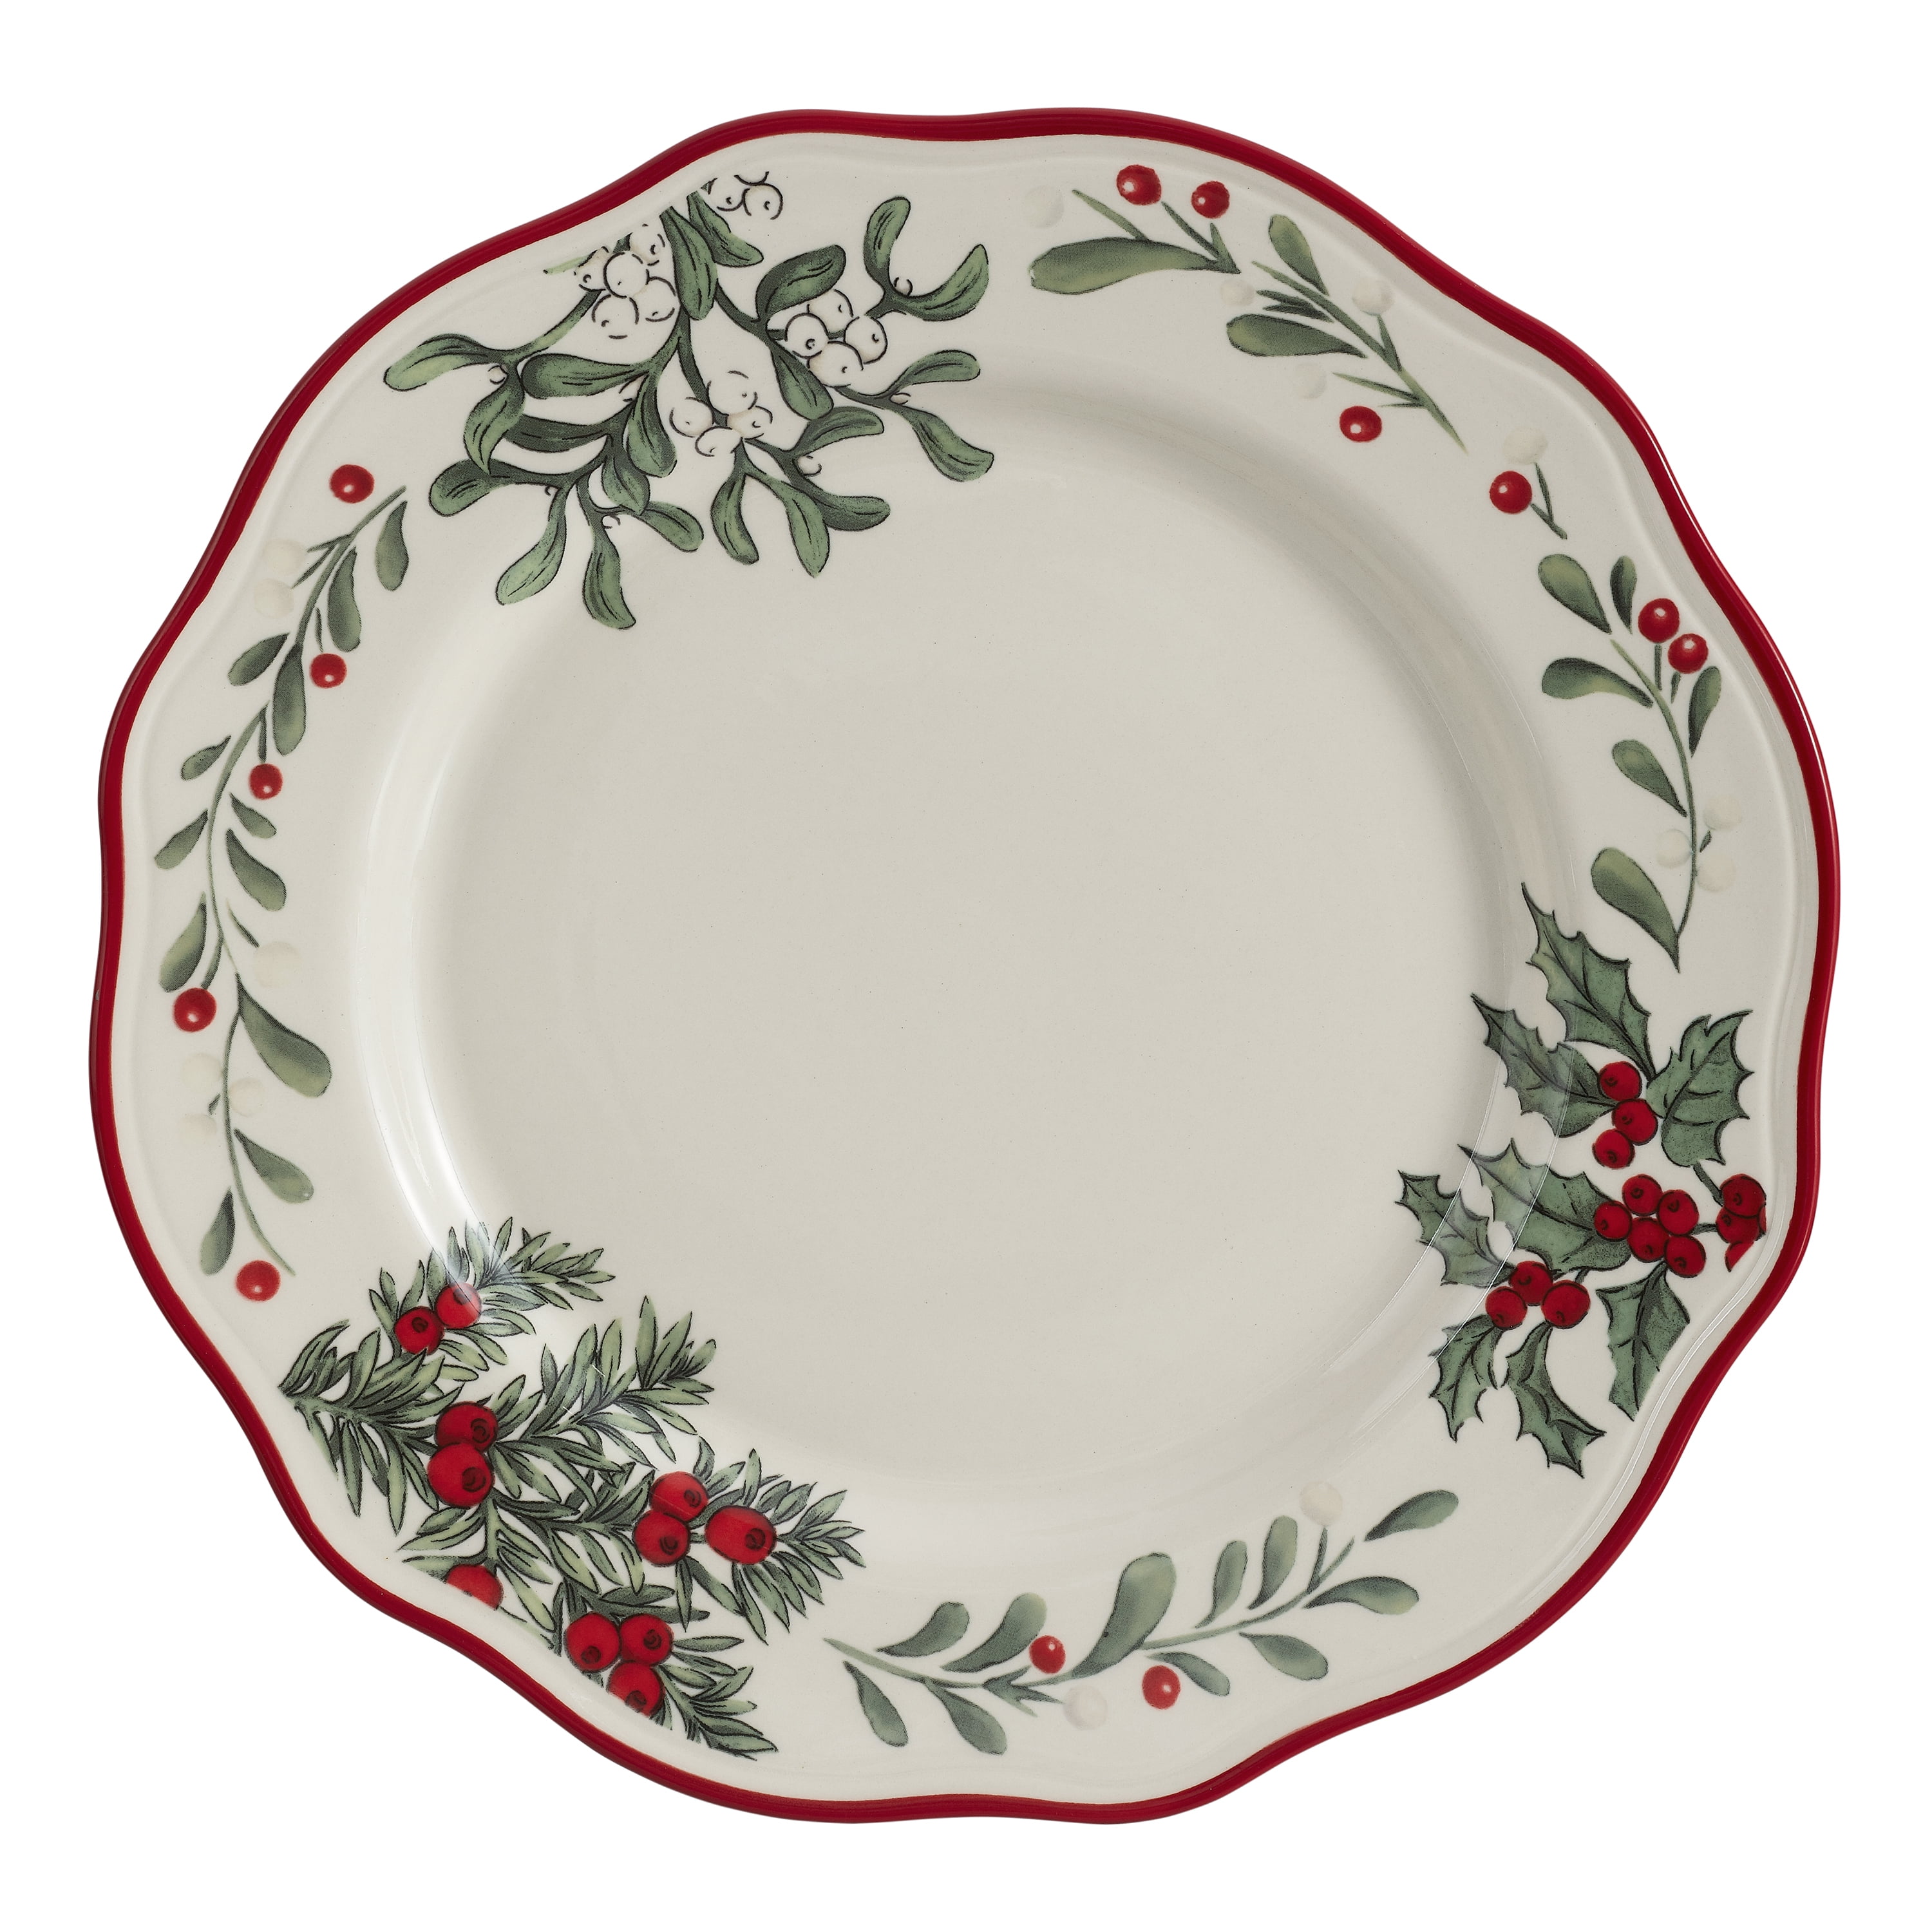 Details about   NEW Better Homes & Gardens WINTER FOREST HORSE 8.75" Salad Plate Heritage 